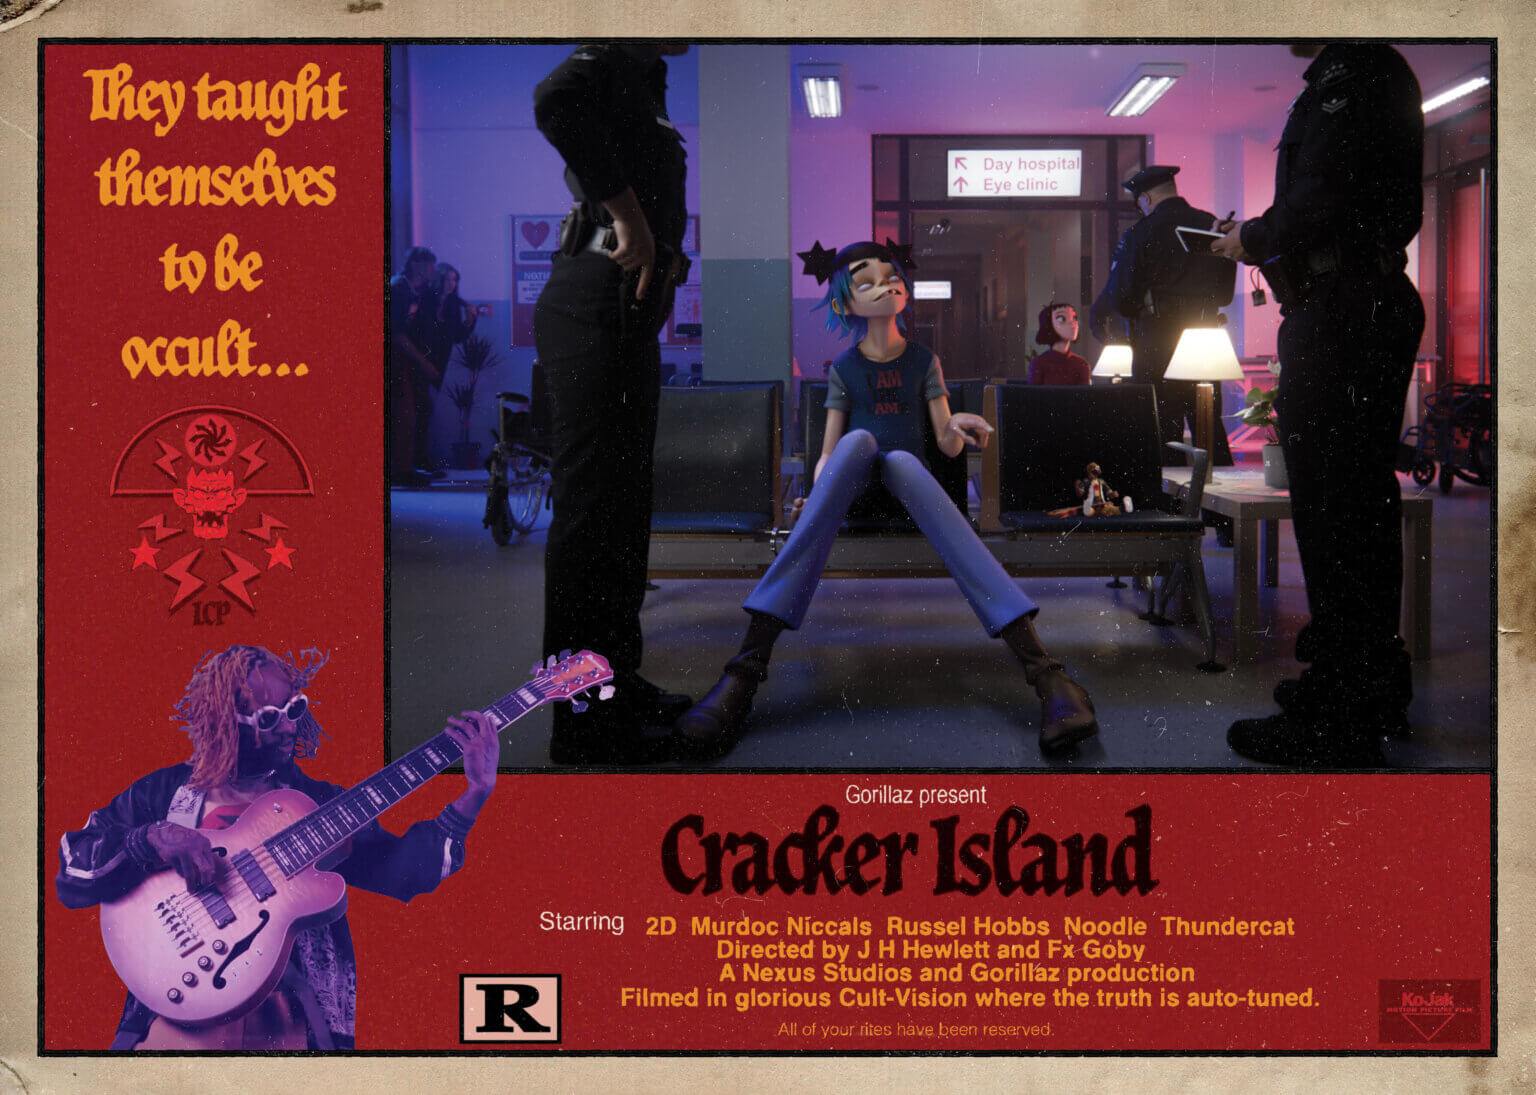 Gorillaz have teamed up up with Nexus Studios to create a new psychedelic video for their "Cracker Island" ft. Thundercat